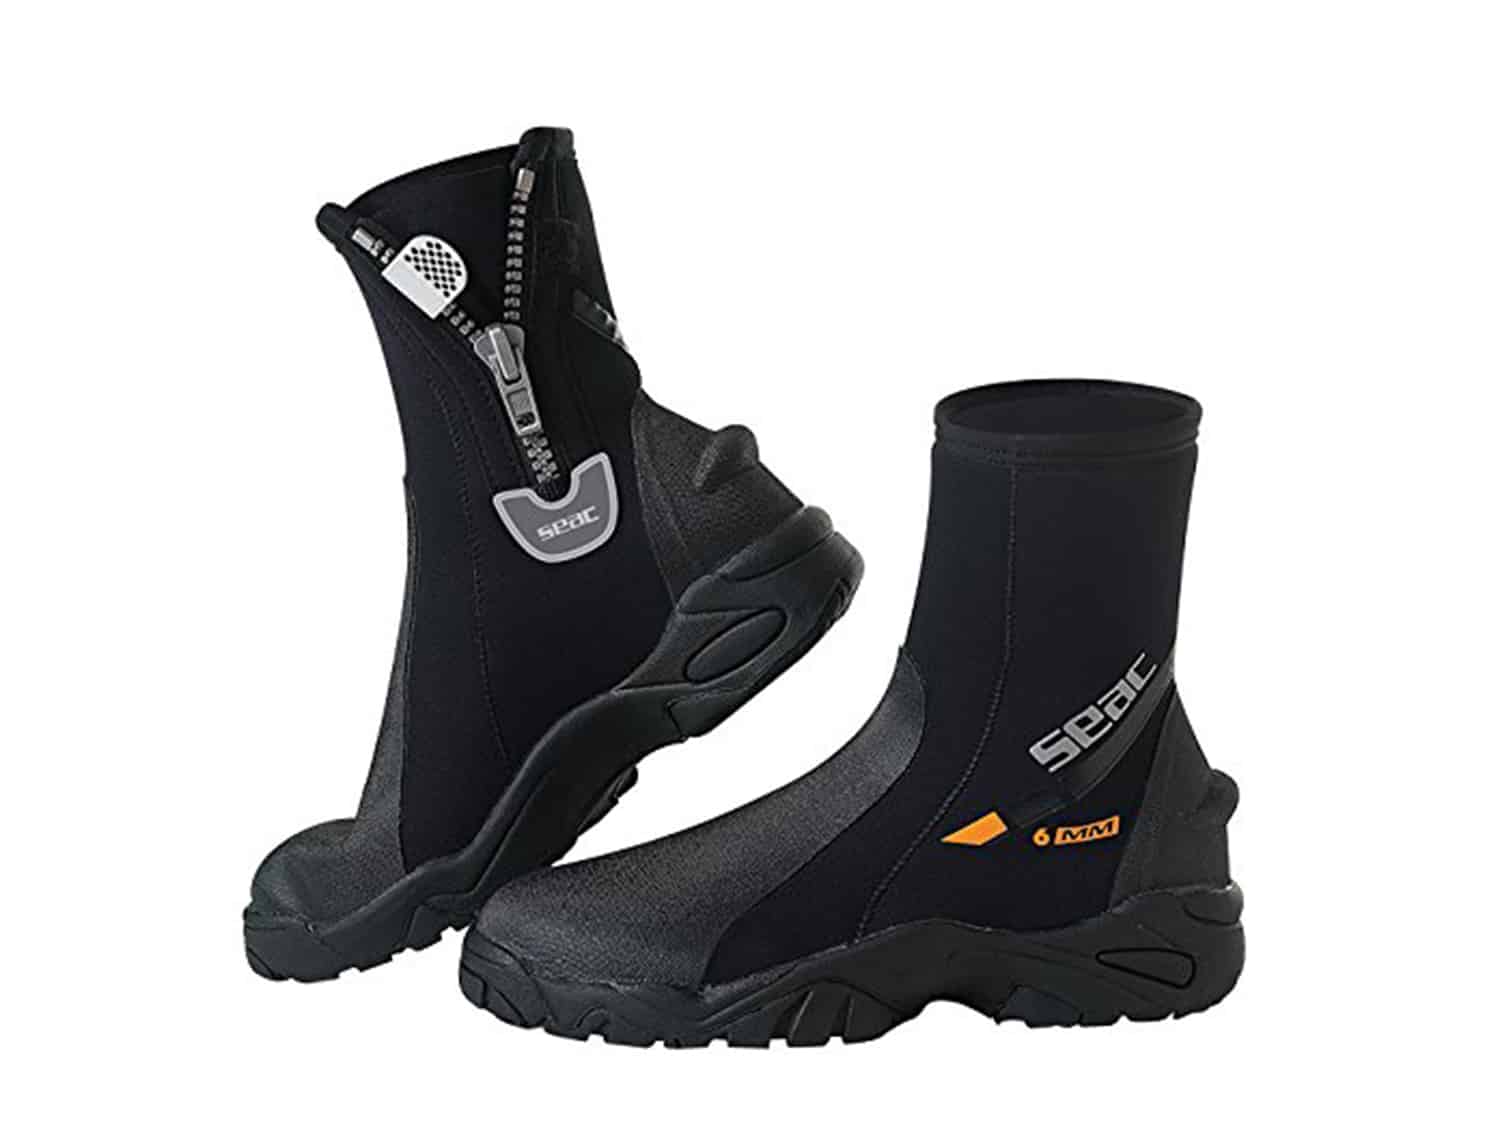 SEAC boots